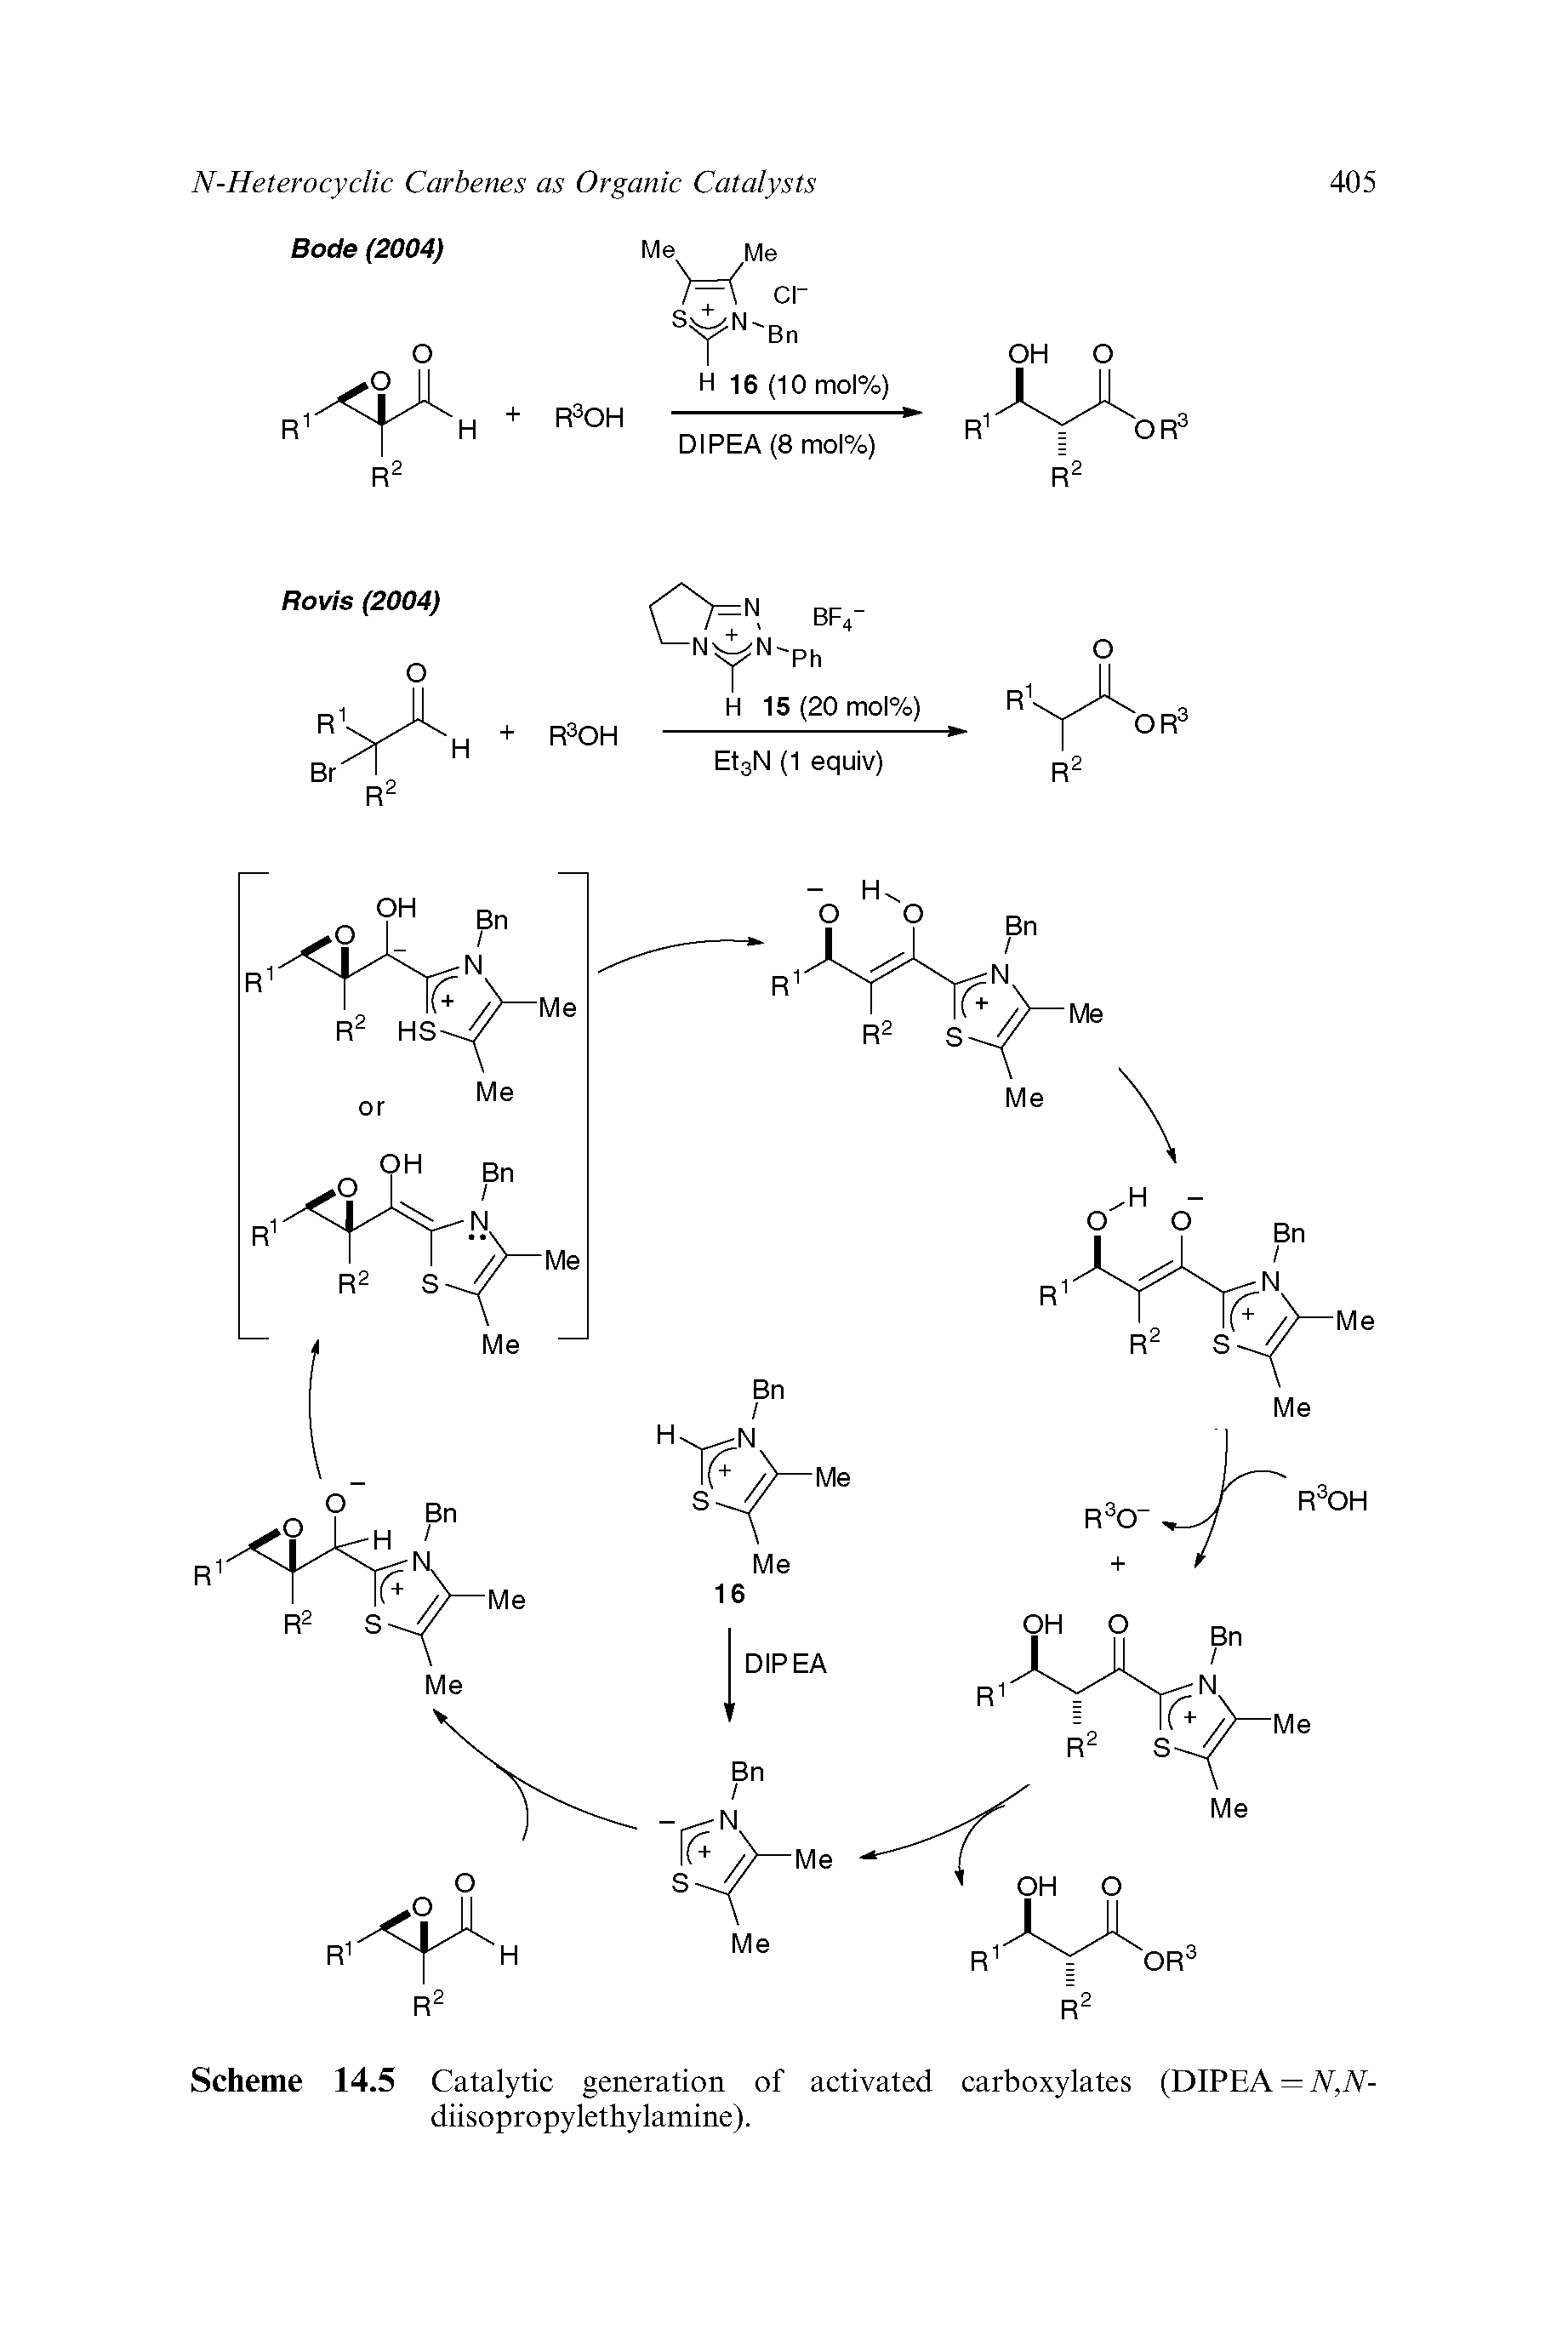 Scheme 14.5 Catalytic generation of activated carboxylates (DIPEA = A, Af-diisopropylethylamine).